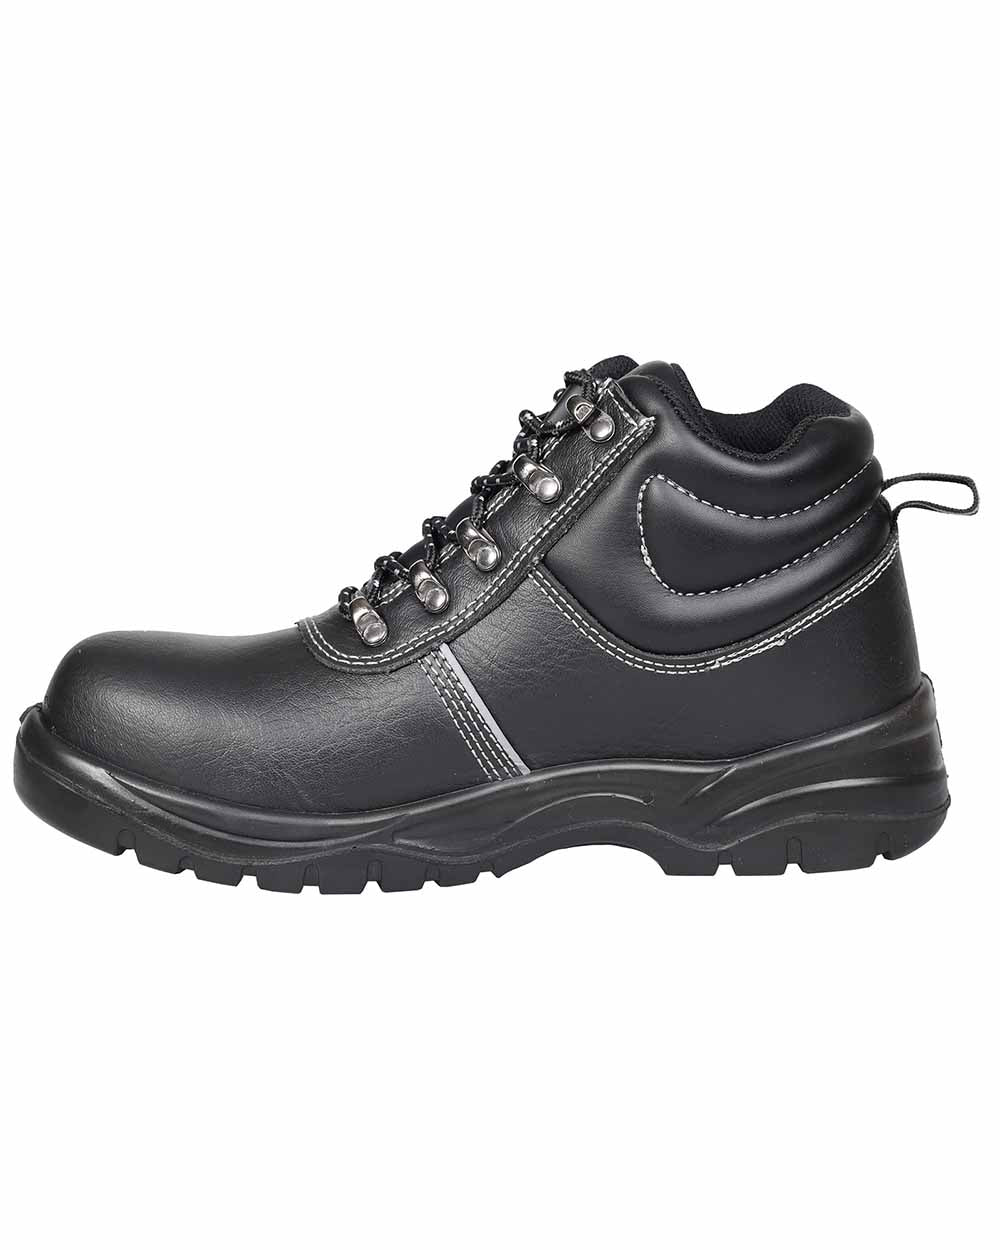 Sdie view Fort Workforce Safety Boots in Black